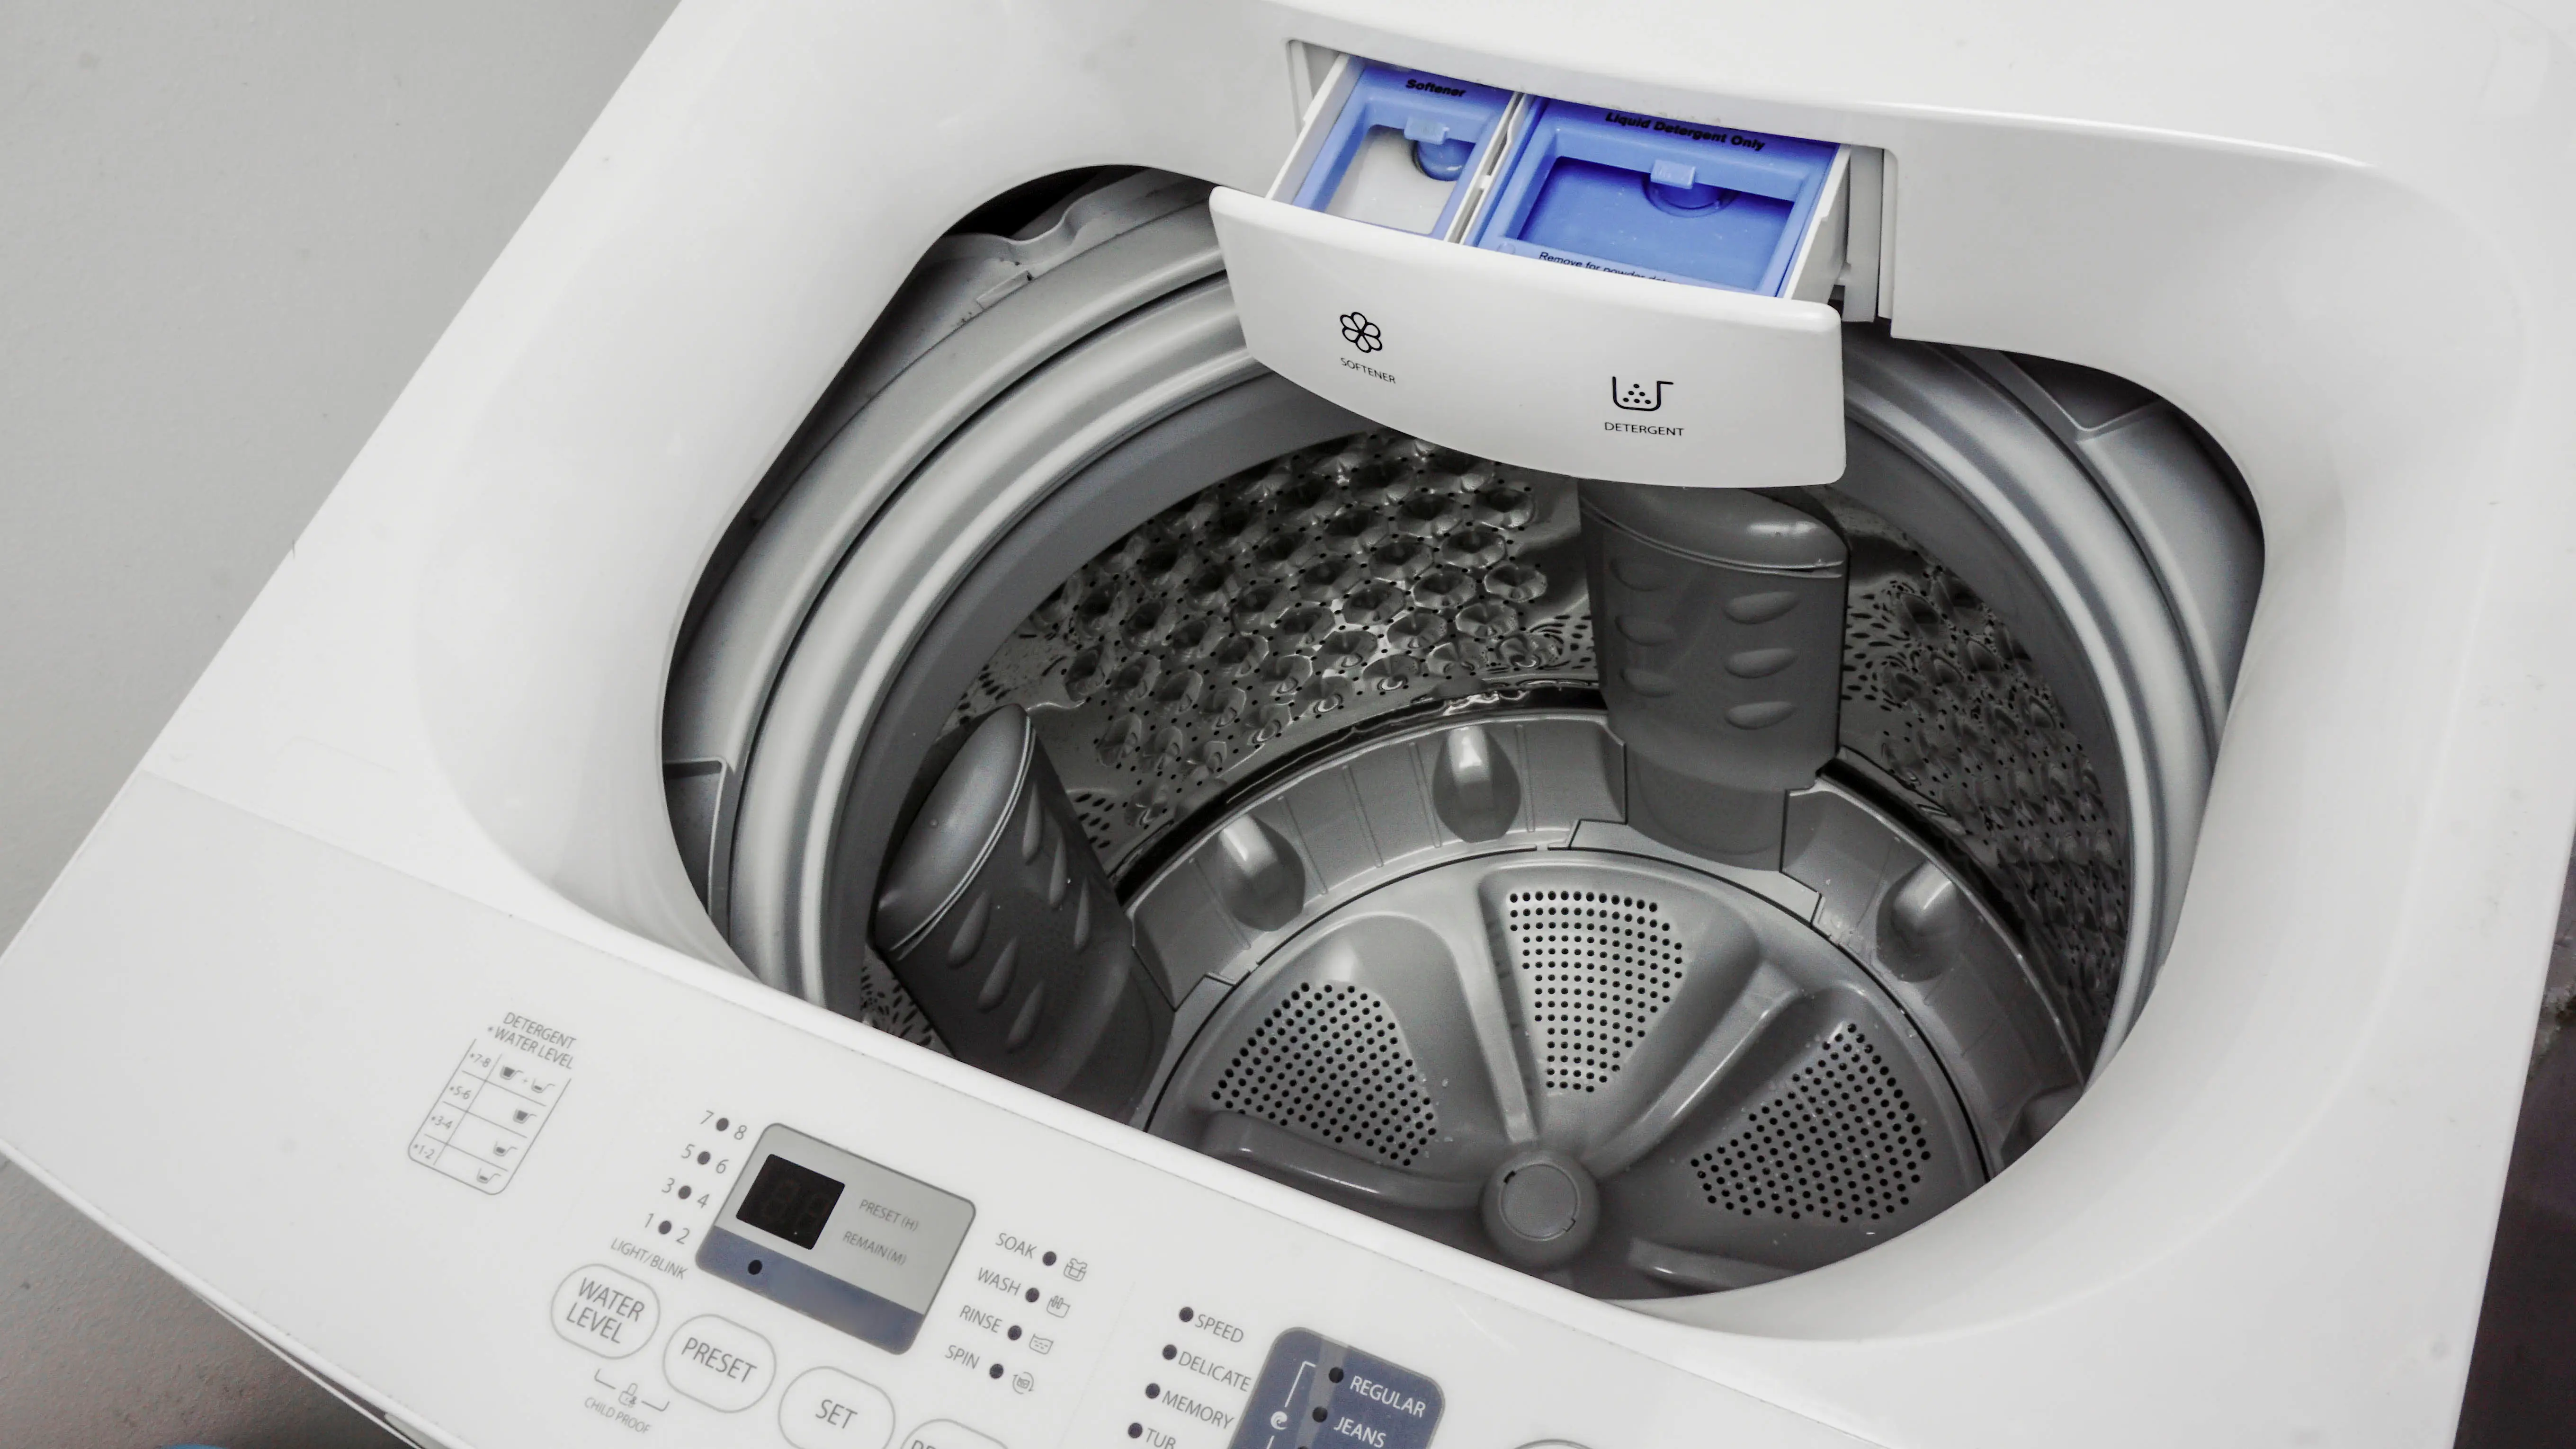 top load washing machine with open detergent and fabric softener compartments